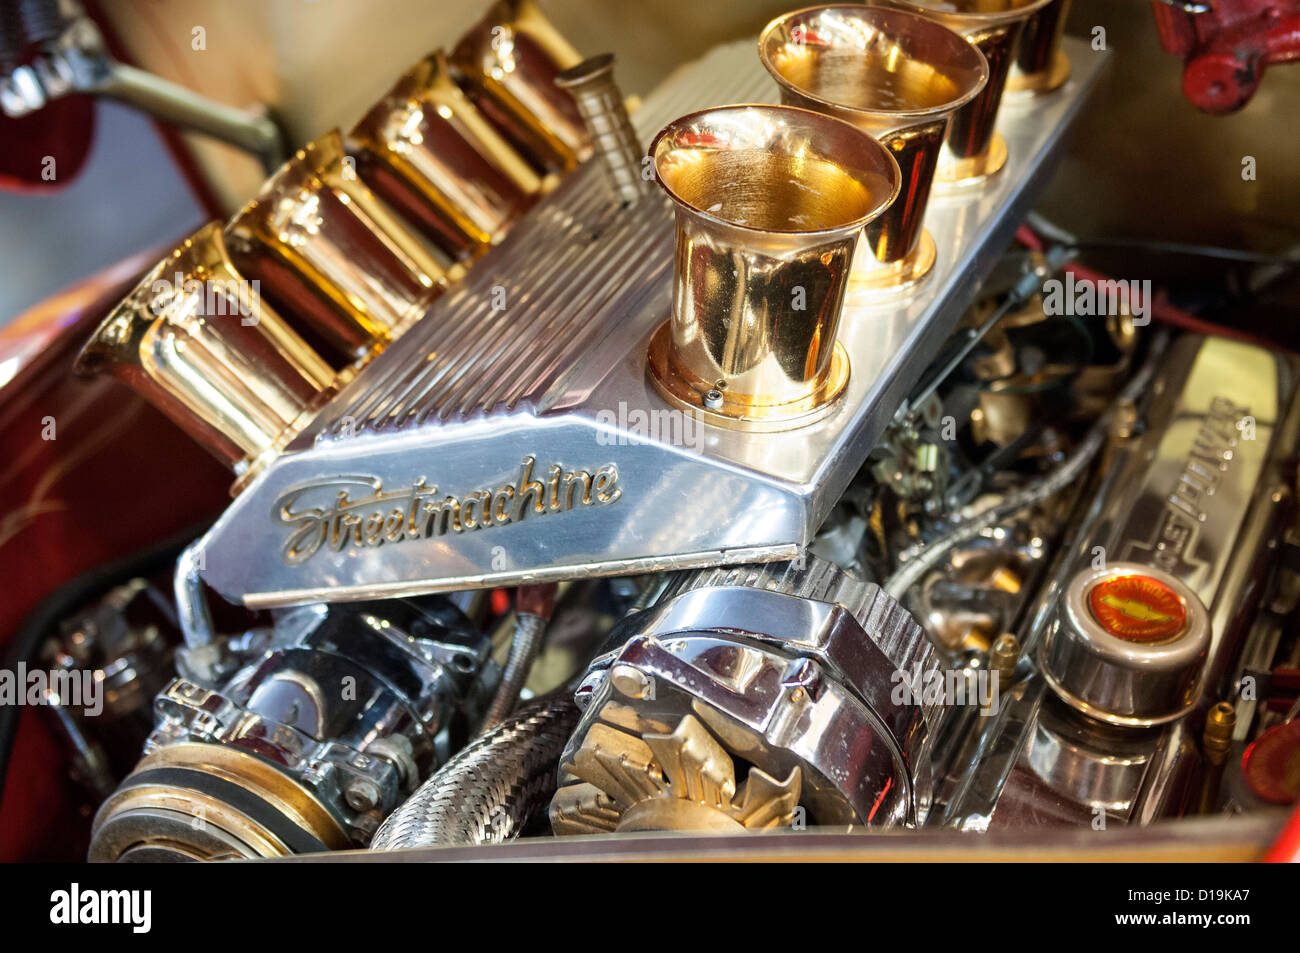 V8 Engine of american Classic Car Stock Photo